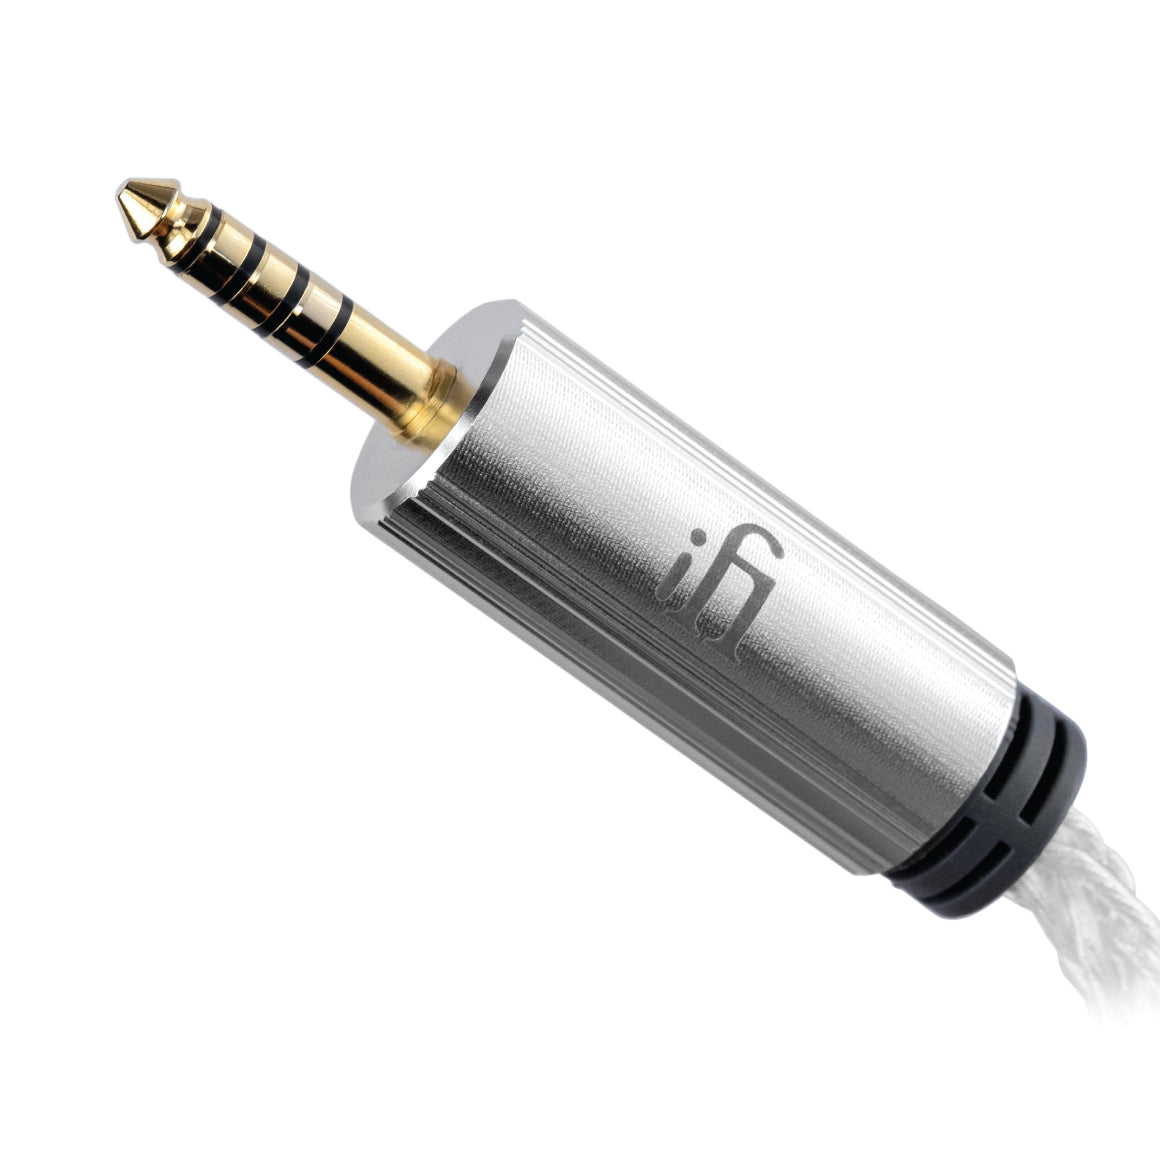 Headphone-Zone-iFi Audio-4.4mm to 4.4mm Cable